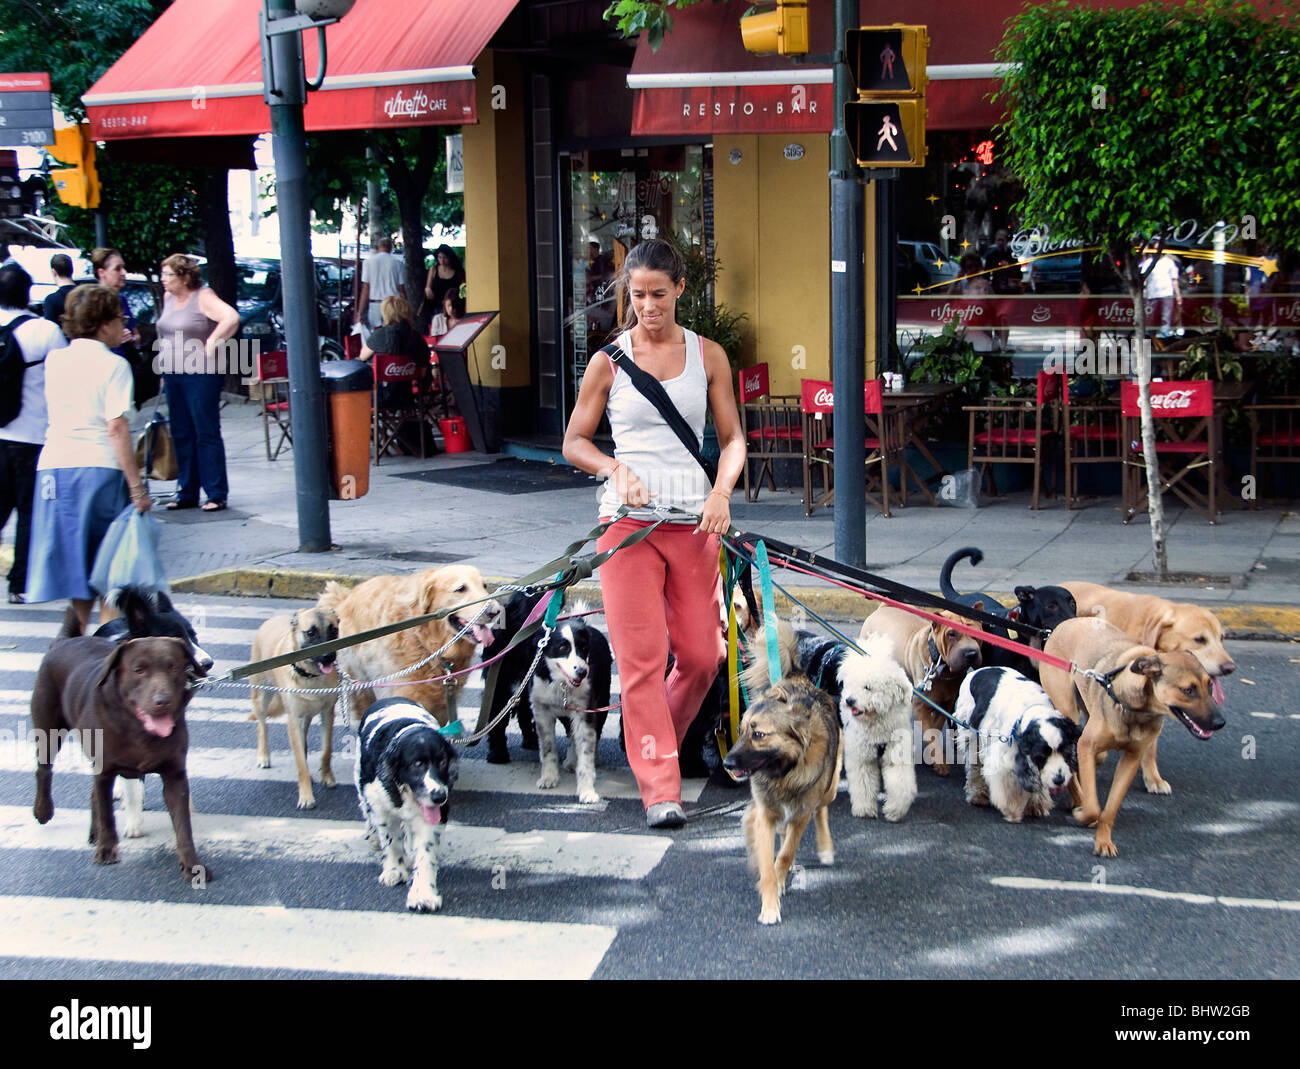 Buenos Aires Argentina Dog Sitter Professional walker dogs woman girl Stock Photo